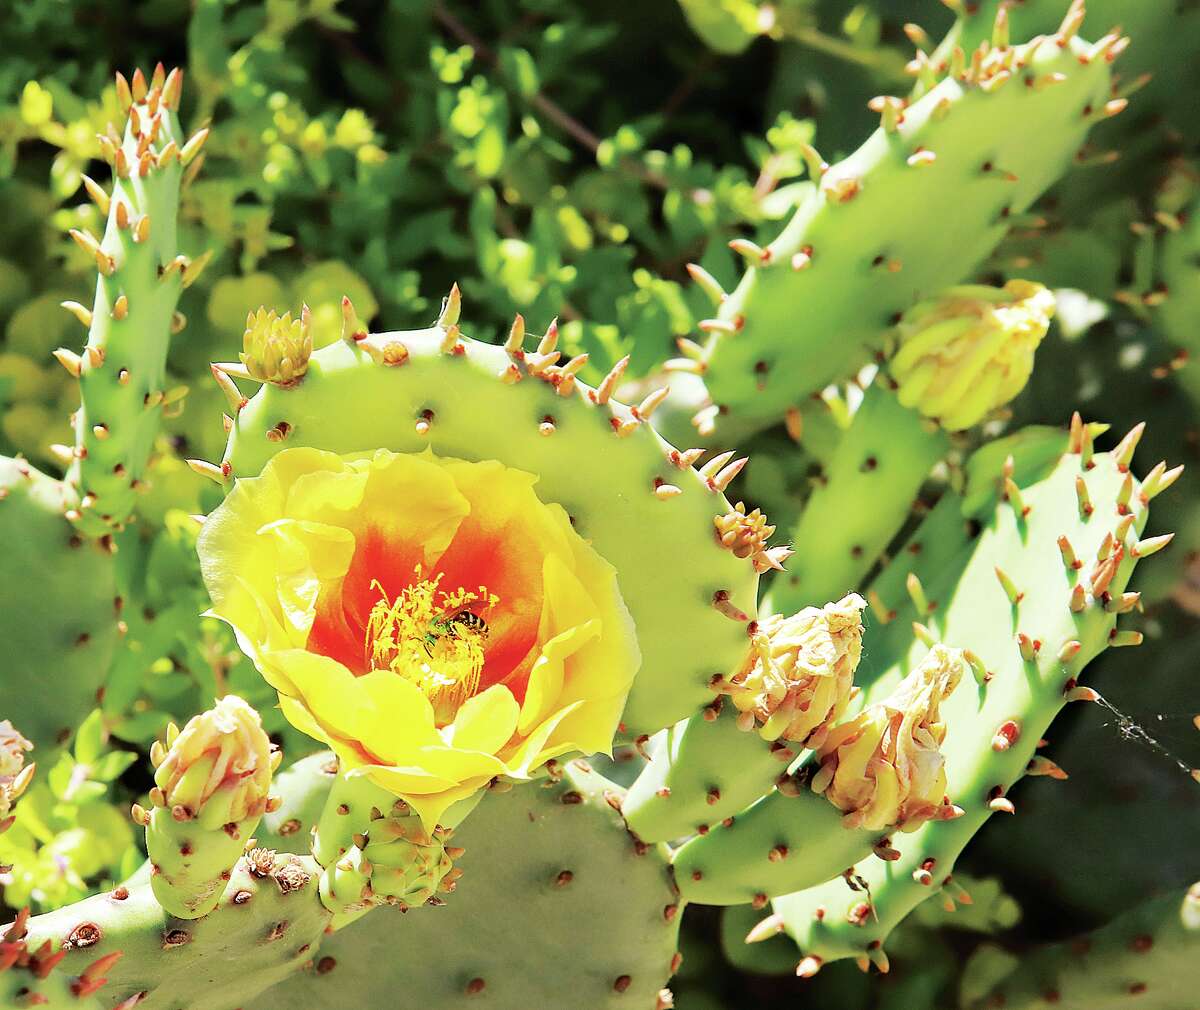 John Badman|The Telegraph The cacti around the Riverbend are blooming, but don't wait to long to see them. Here, a bee works to pollinate a cacti flower on Broadway Street in East Alton Thursday. The cacti, known for their thorny appearance, only bloom for a few days once a year.